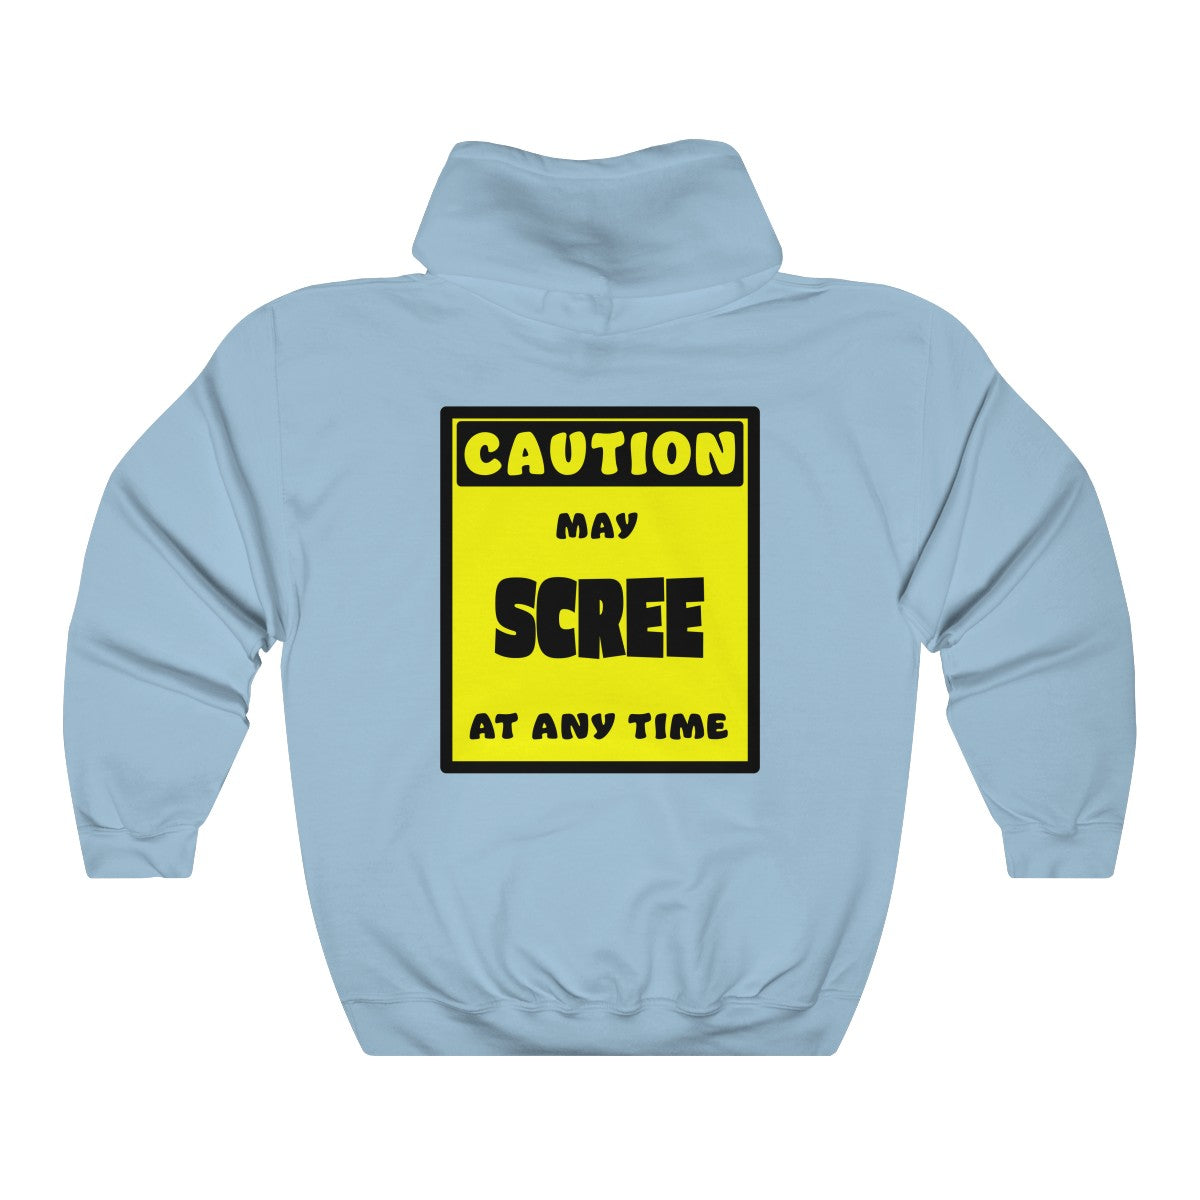 CAUTION! May SCREE at any time! - Hoodie Hoodie AFLT-Whootorca Light Blue S 